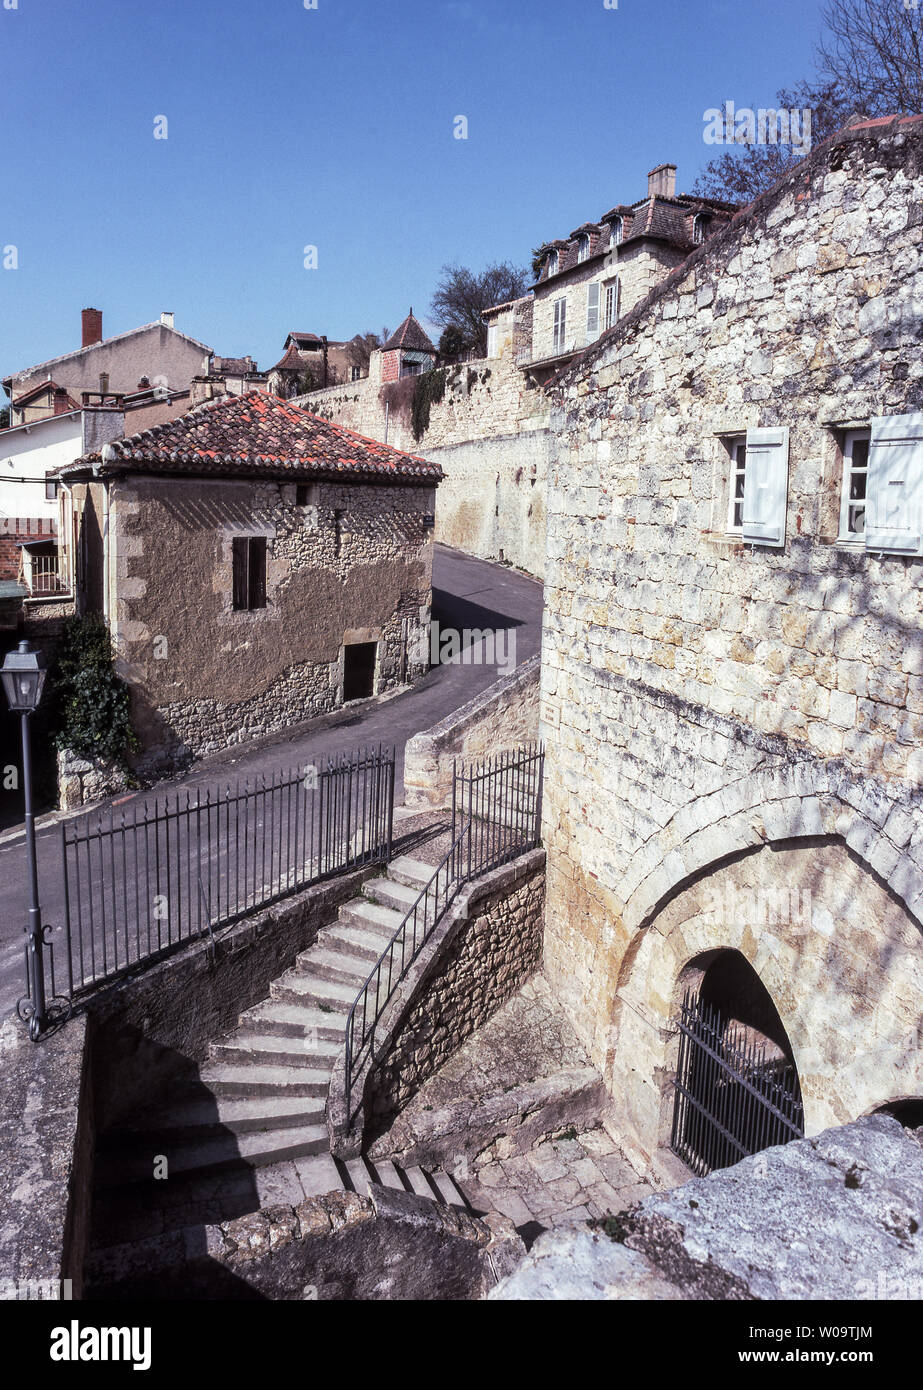 France.Dept. Gers. Lectoure. An old town, long pre-dating the Gallo-Roman era.This photo shows the area around the 13th century fountain of Diana. Stock Photo